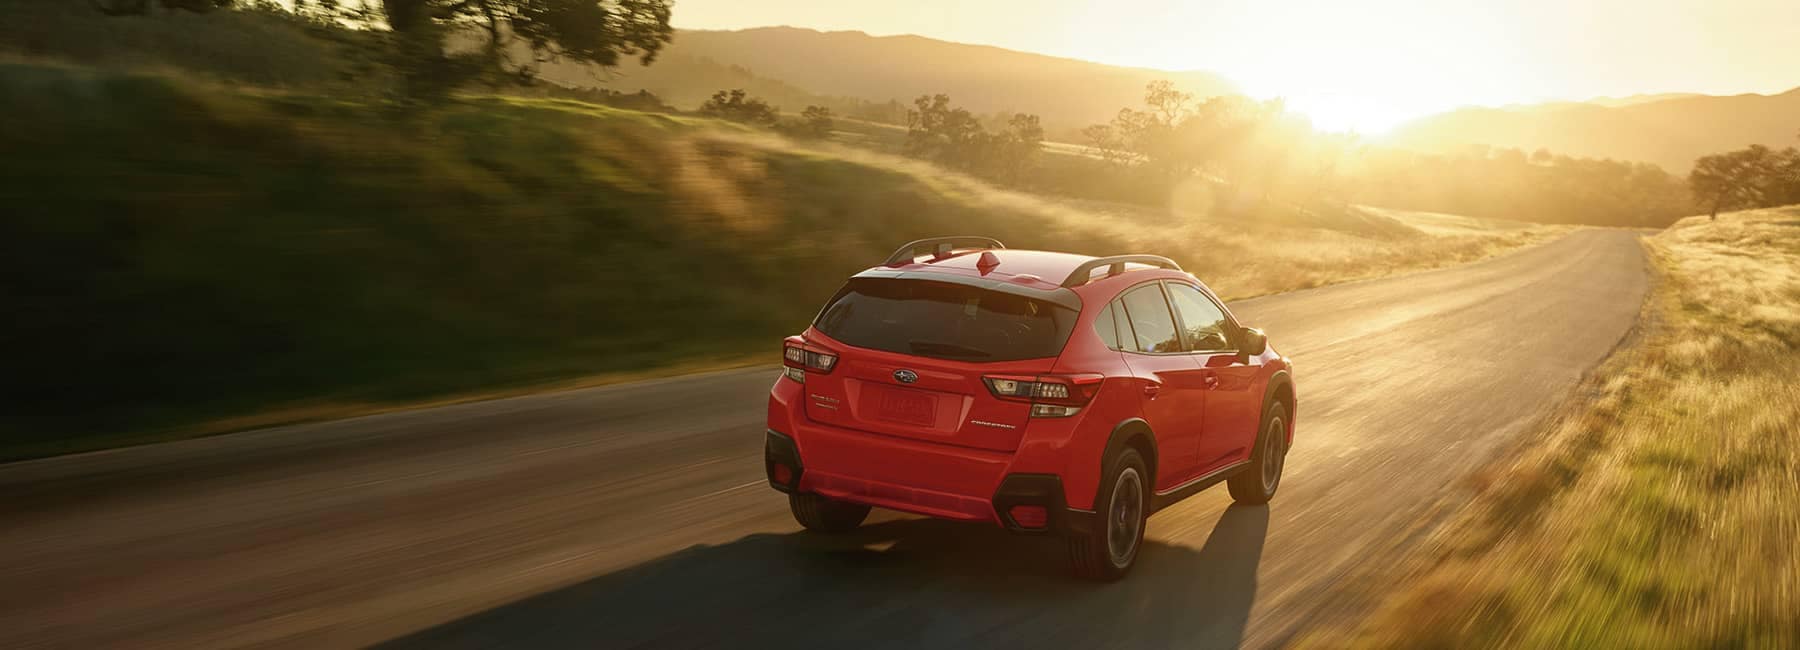 2022 Subaru Crosstrek driving on a country road into the sunset